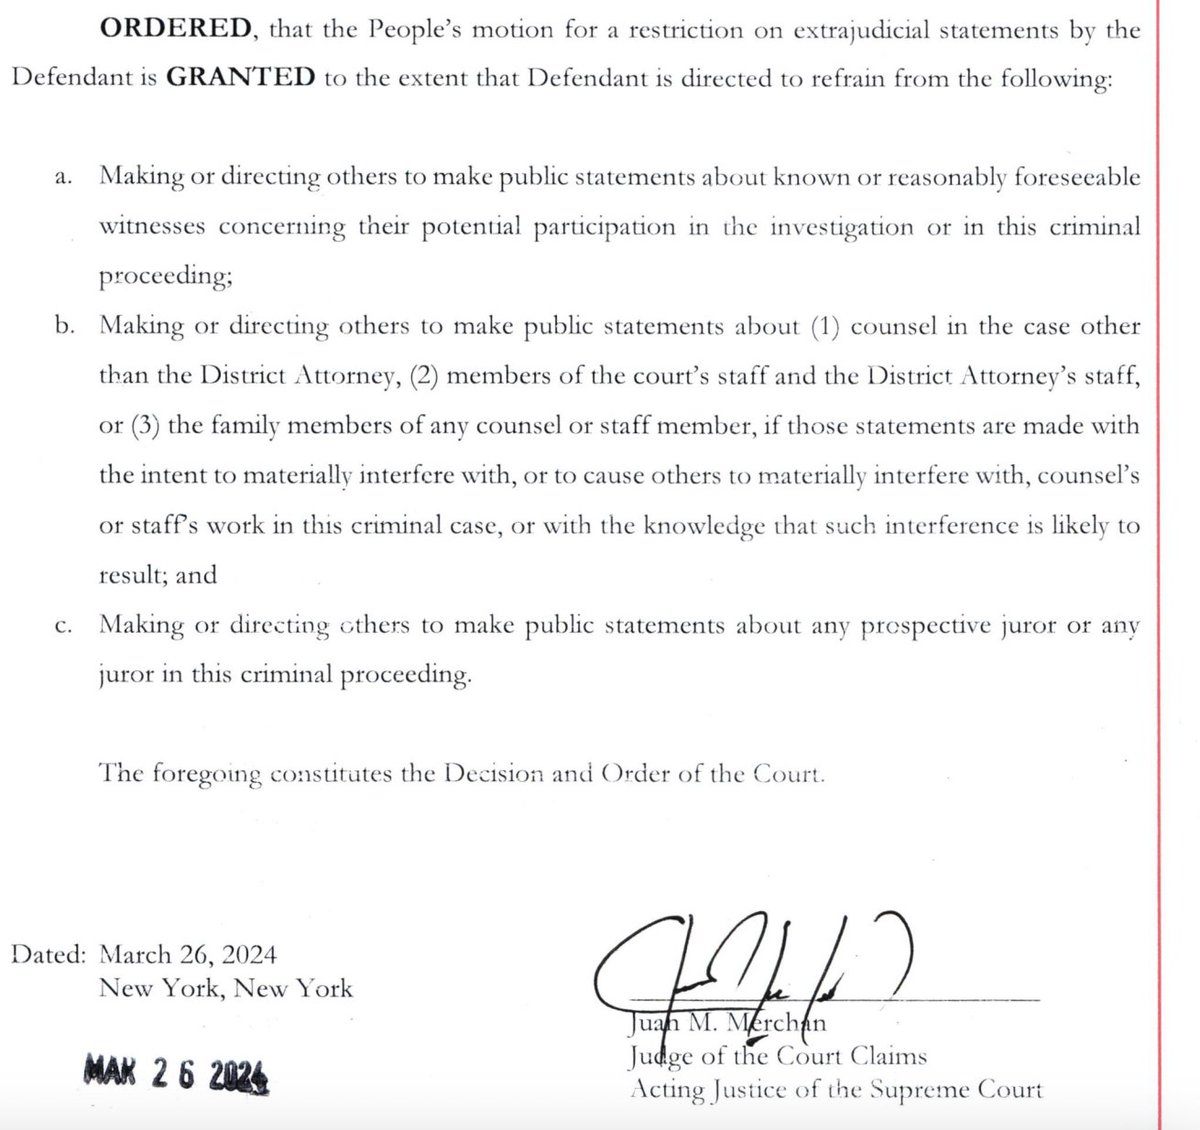 BREAKING: NY judge issues a gag order restricting Trump's ability to attack witnesses, prosecutors, their families or jurors. nycourts.gov/LegacyPDFS/pre…